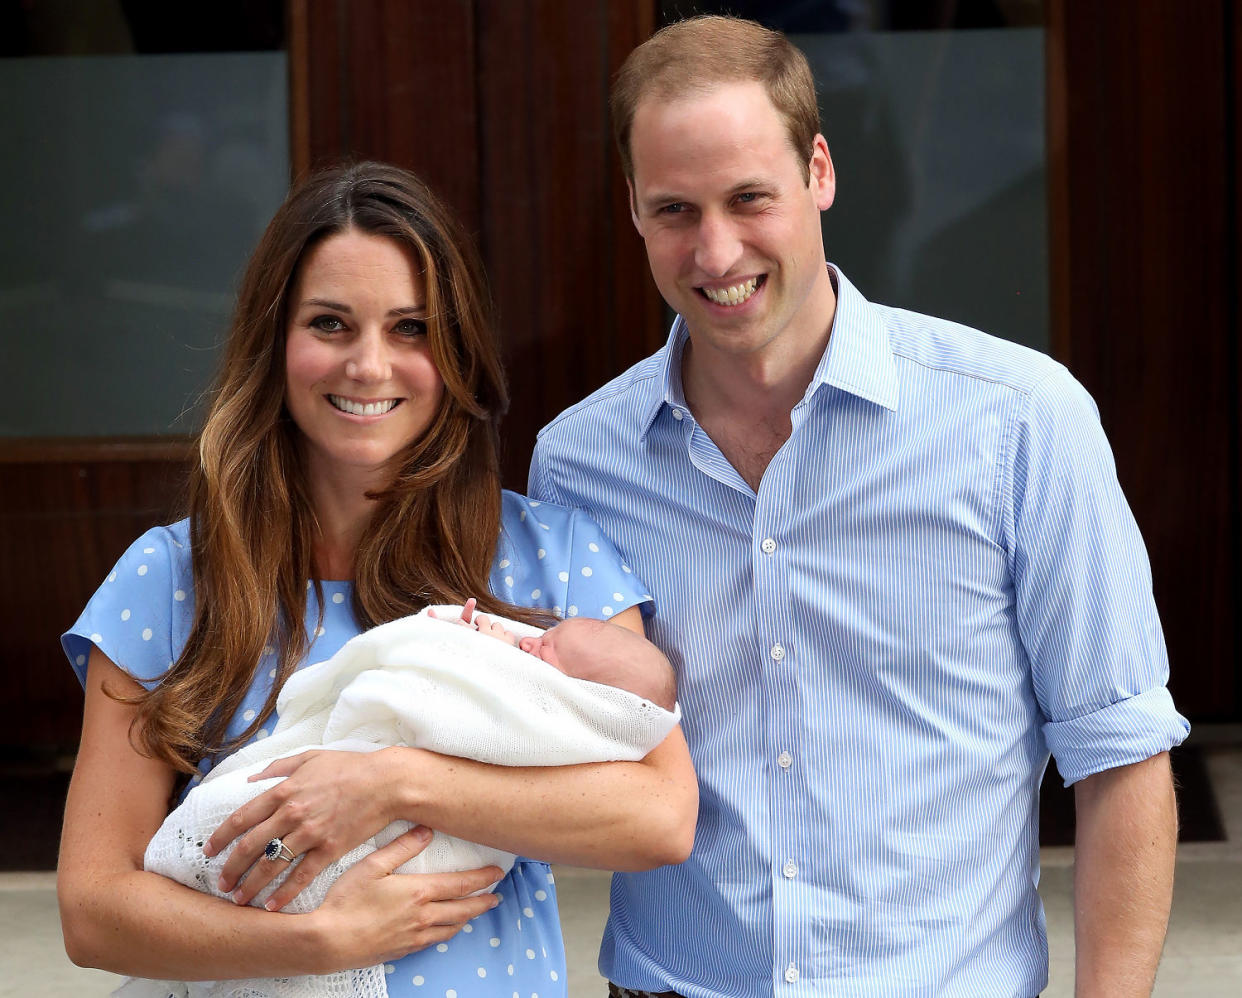 Prince William, Duke of Cambridge and Catherine, Duchess of Cambridge with their newborn son. (Chris Jackson / Getty Images)